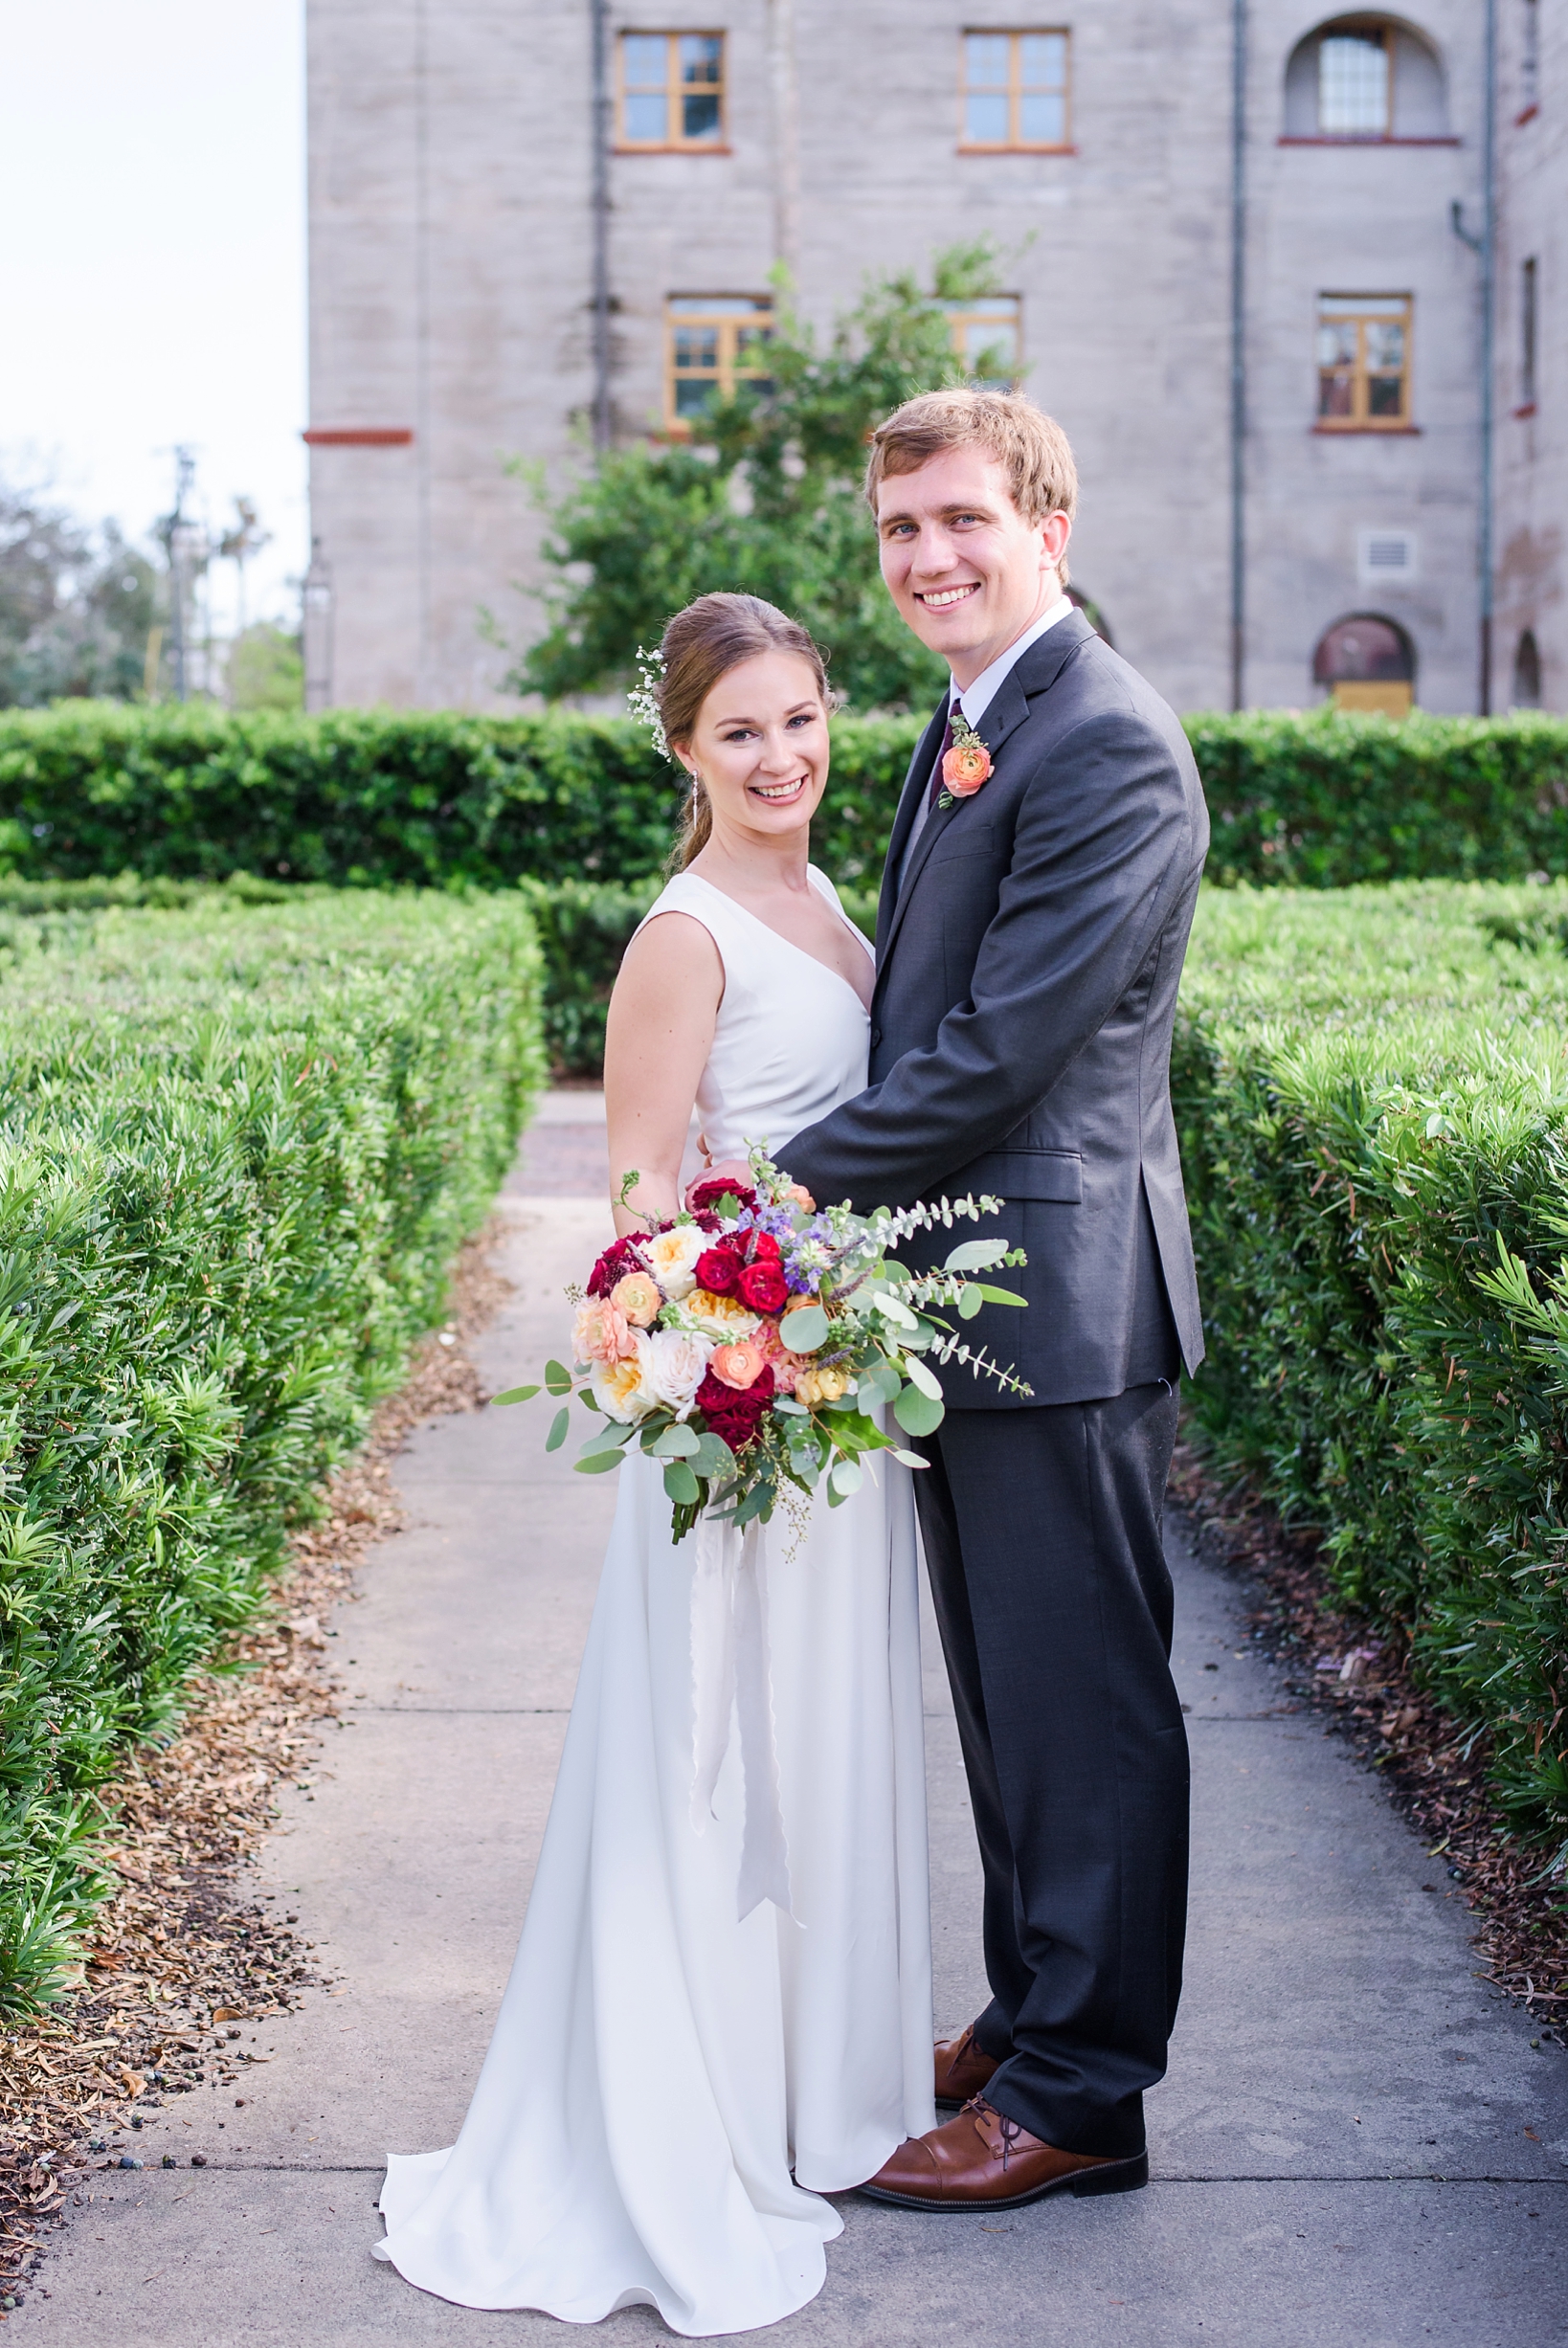 Classic wedding portrait of bride and groom by Sarah & Ben Photography